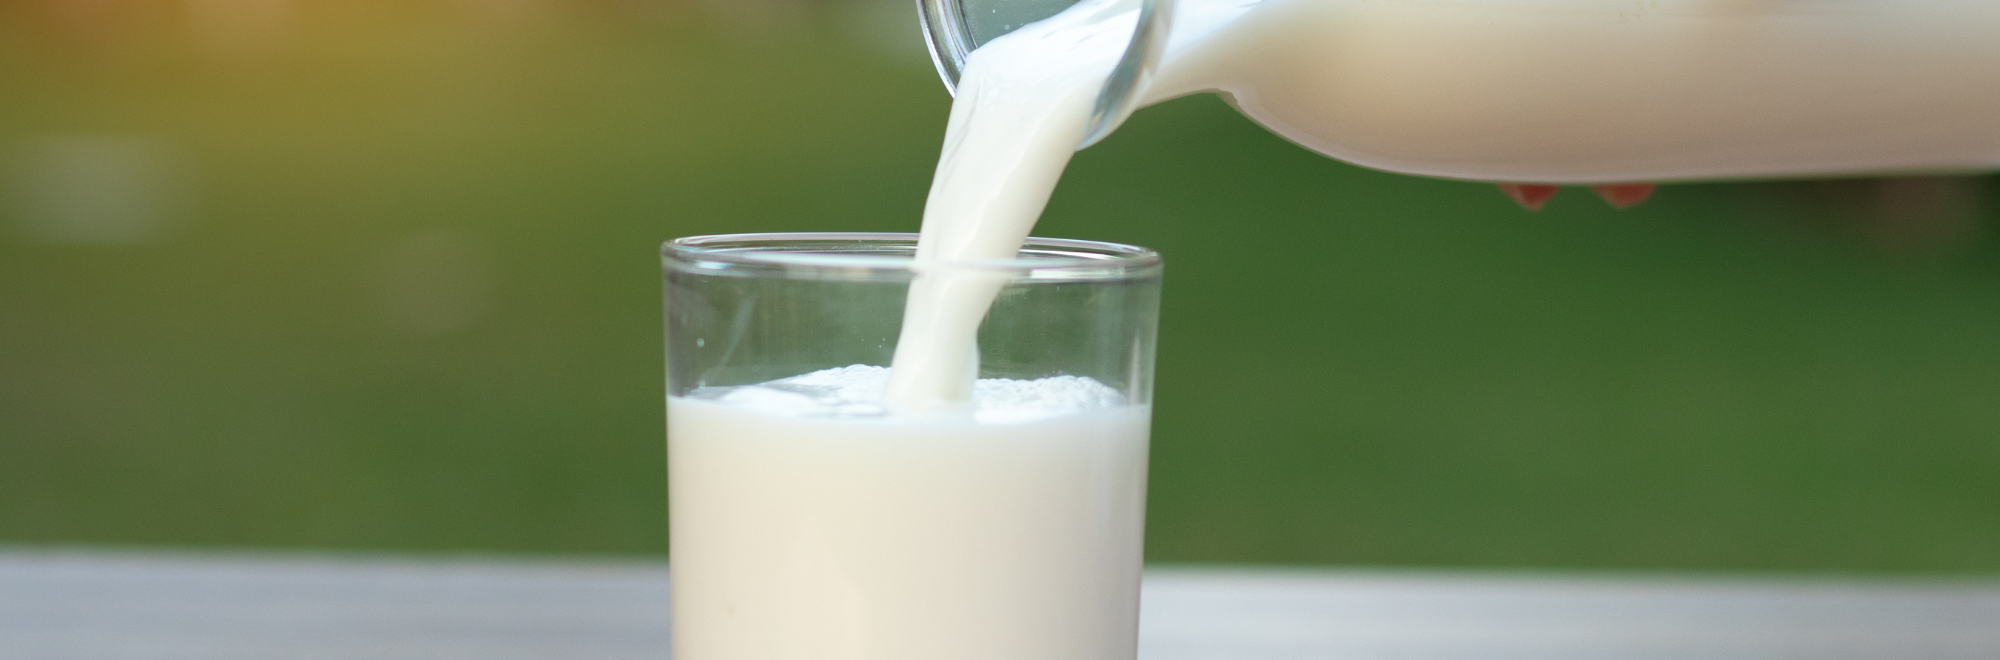 bottle of milk pouring into a glass